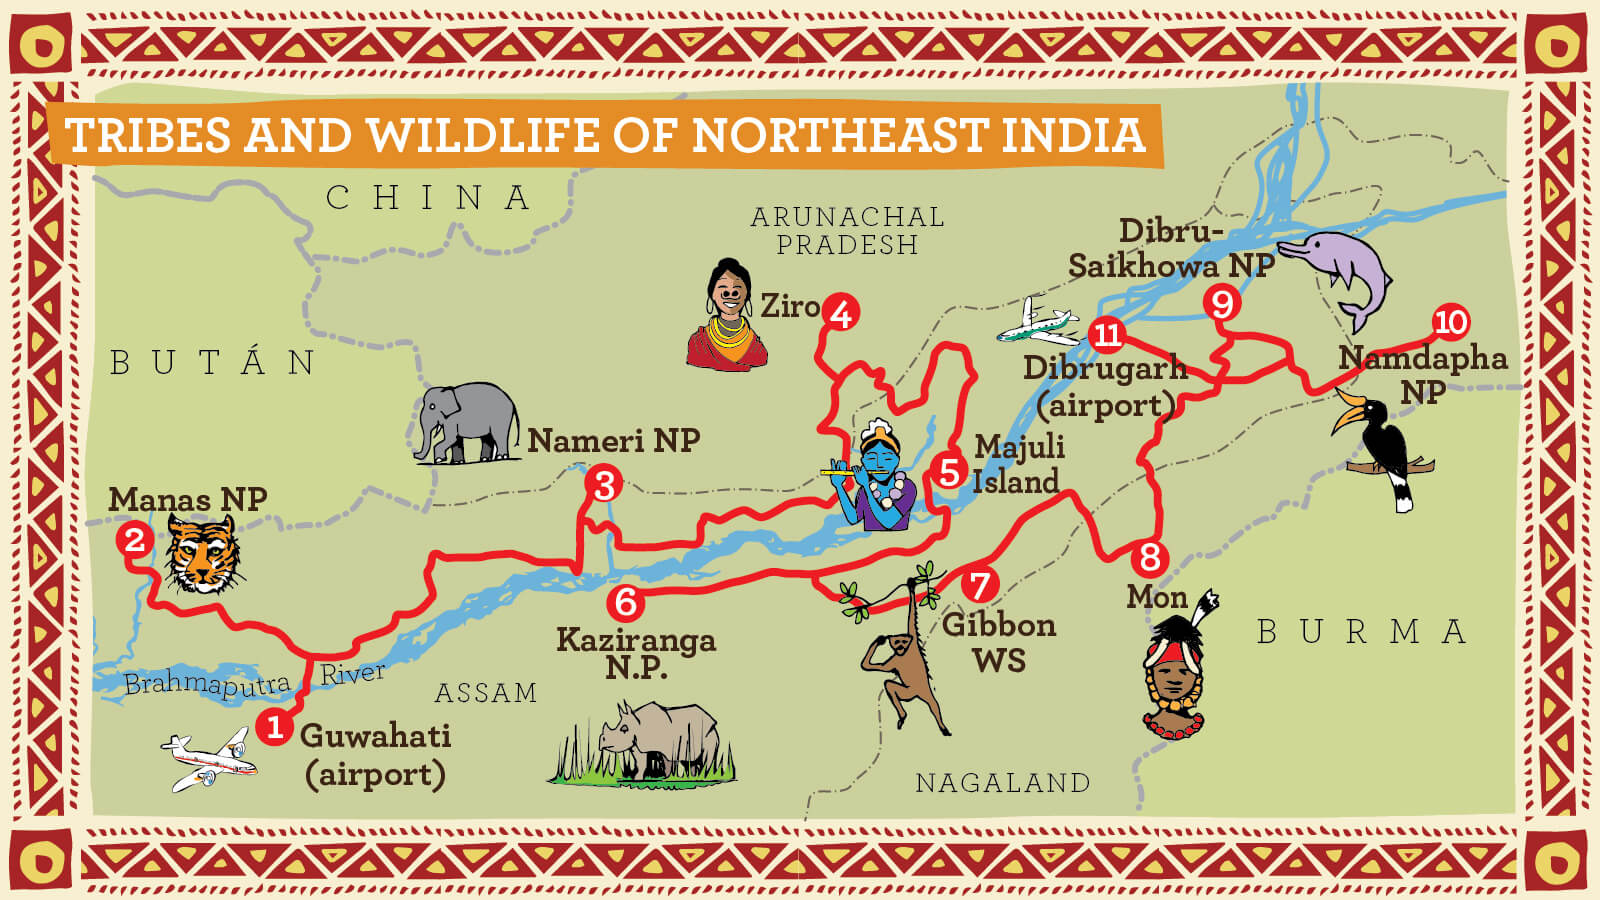 Illustrated Route Map for Wildlife and Tribal Tour of Northeast India